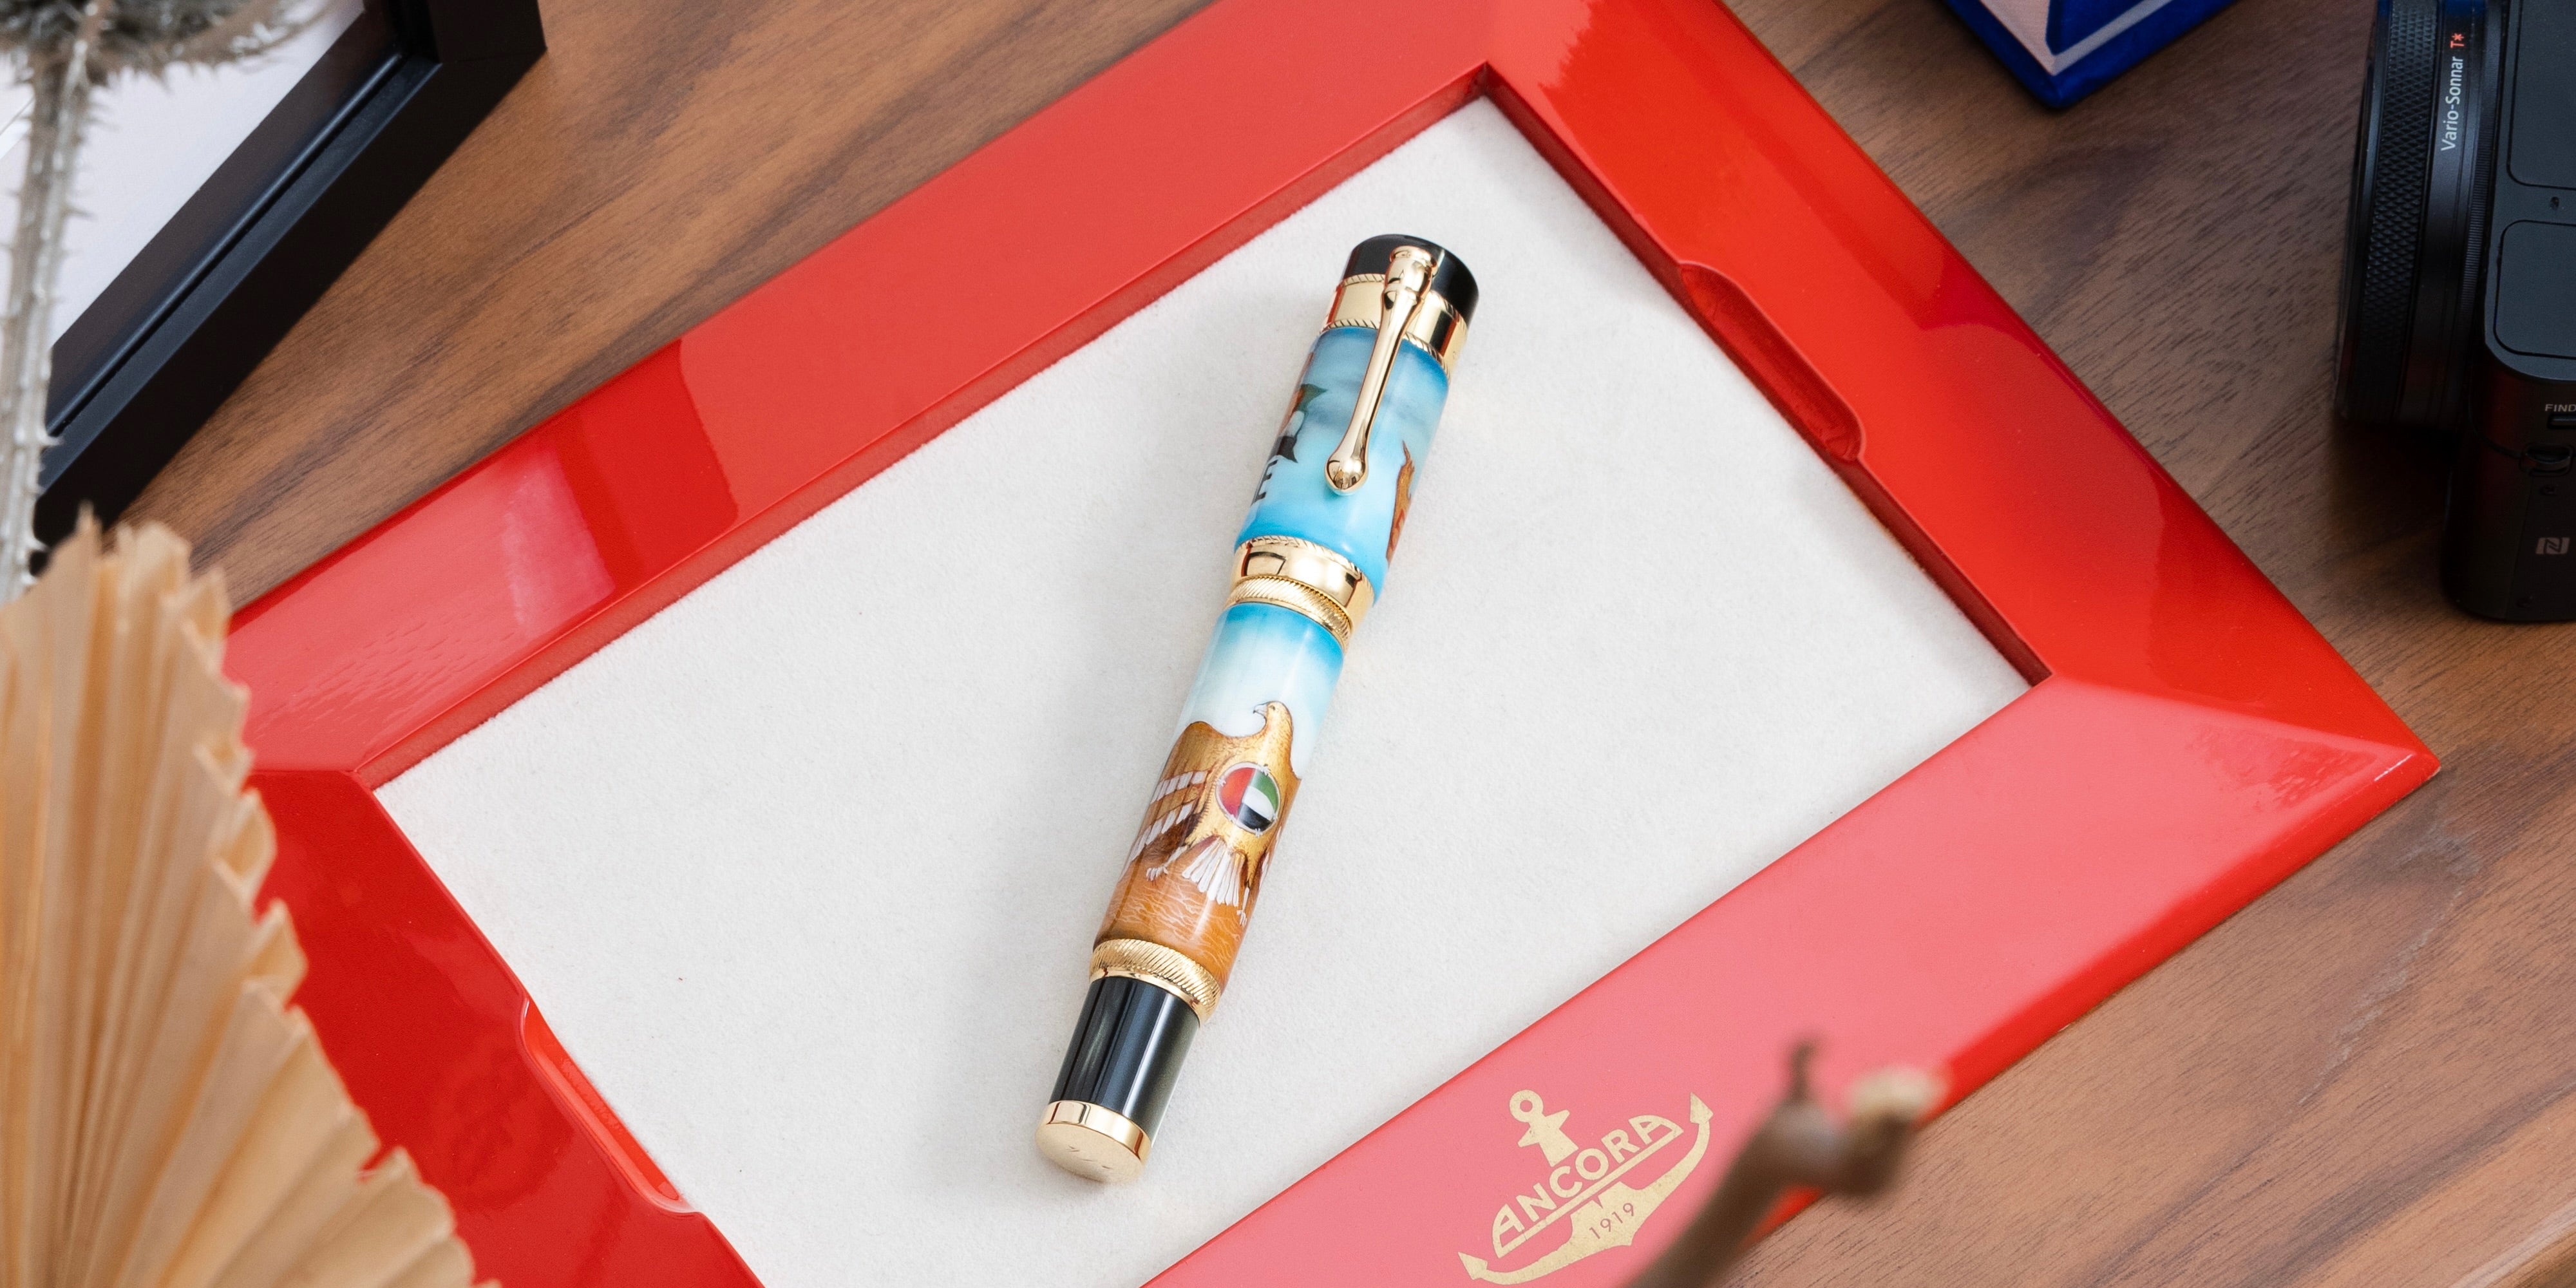 Celebrating UAE's 51st National Day with Exclusive Limited Edition Pens